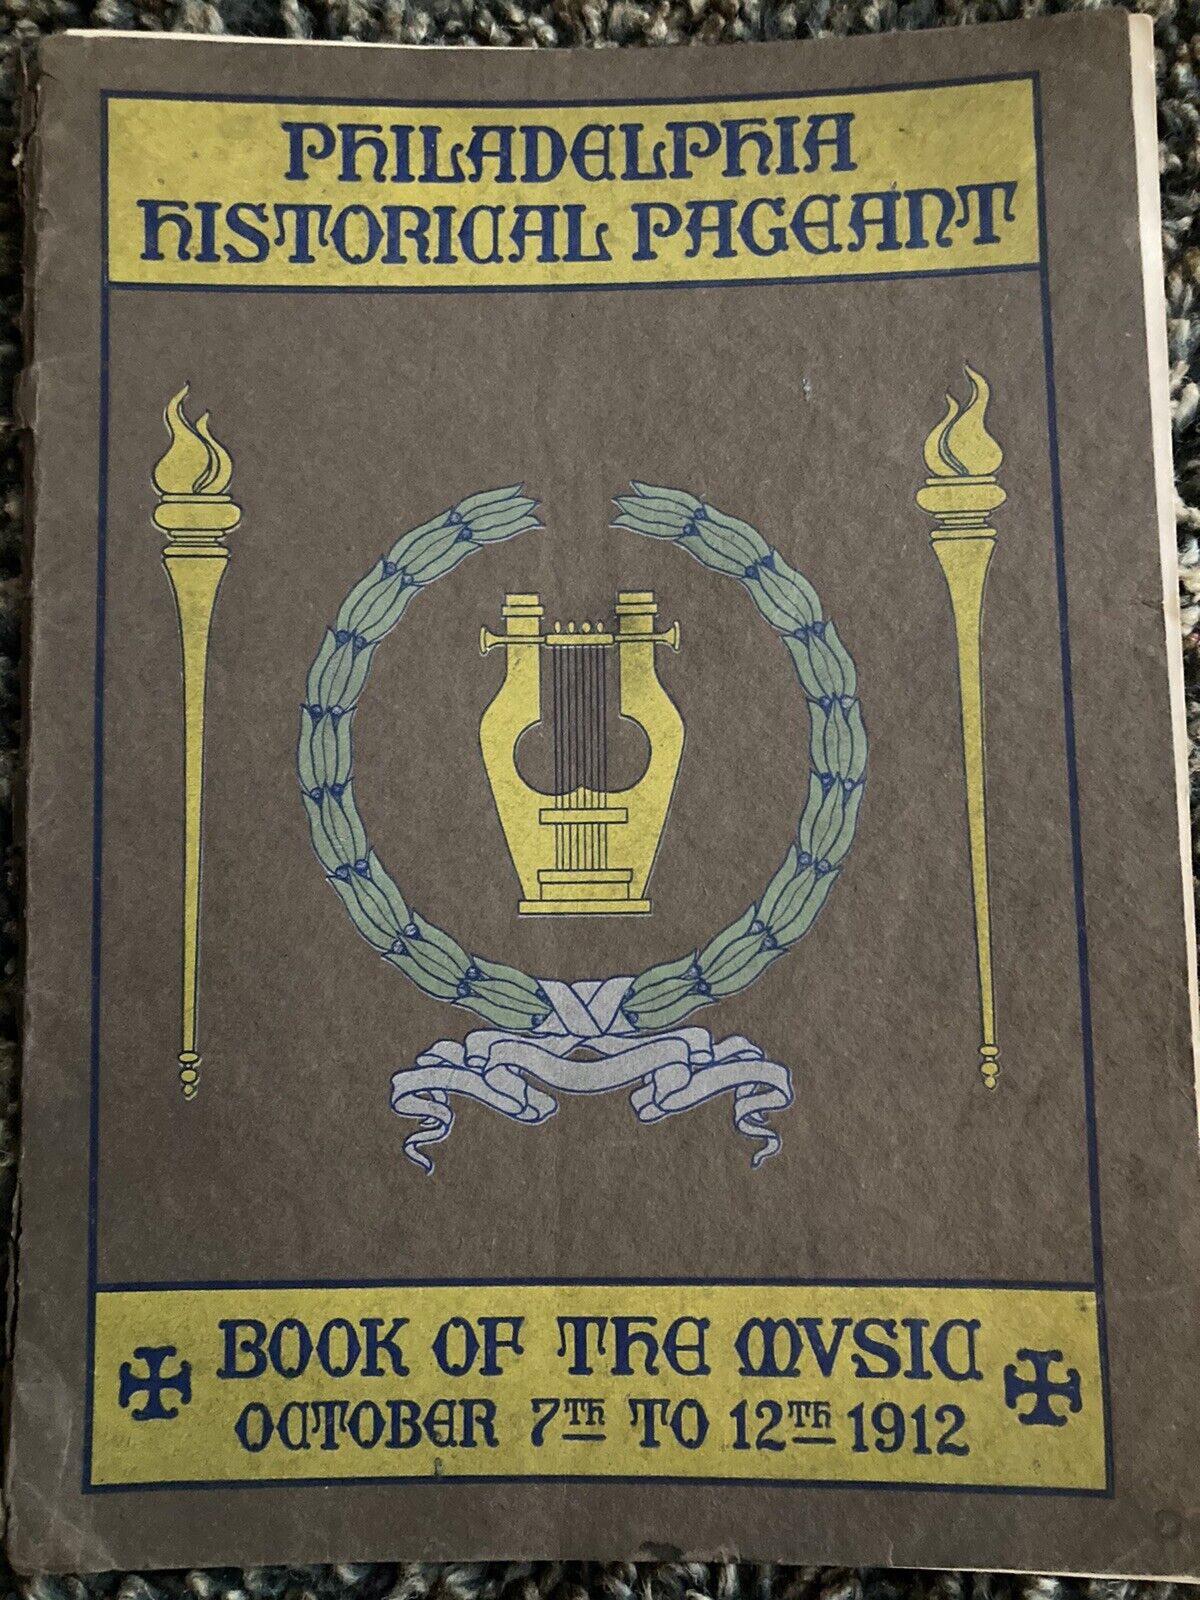 PHILADELPHIA HISTORICAL PAGEANT “BOOK OF THE MUSIC” October 7th to 12th 1912